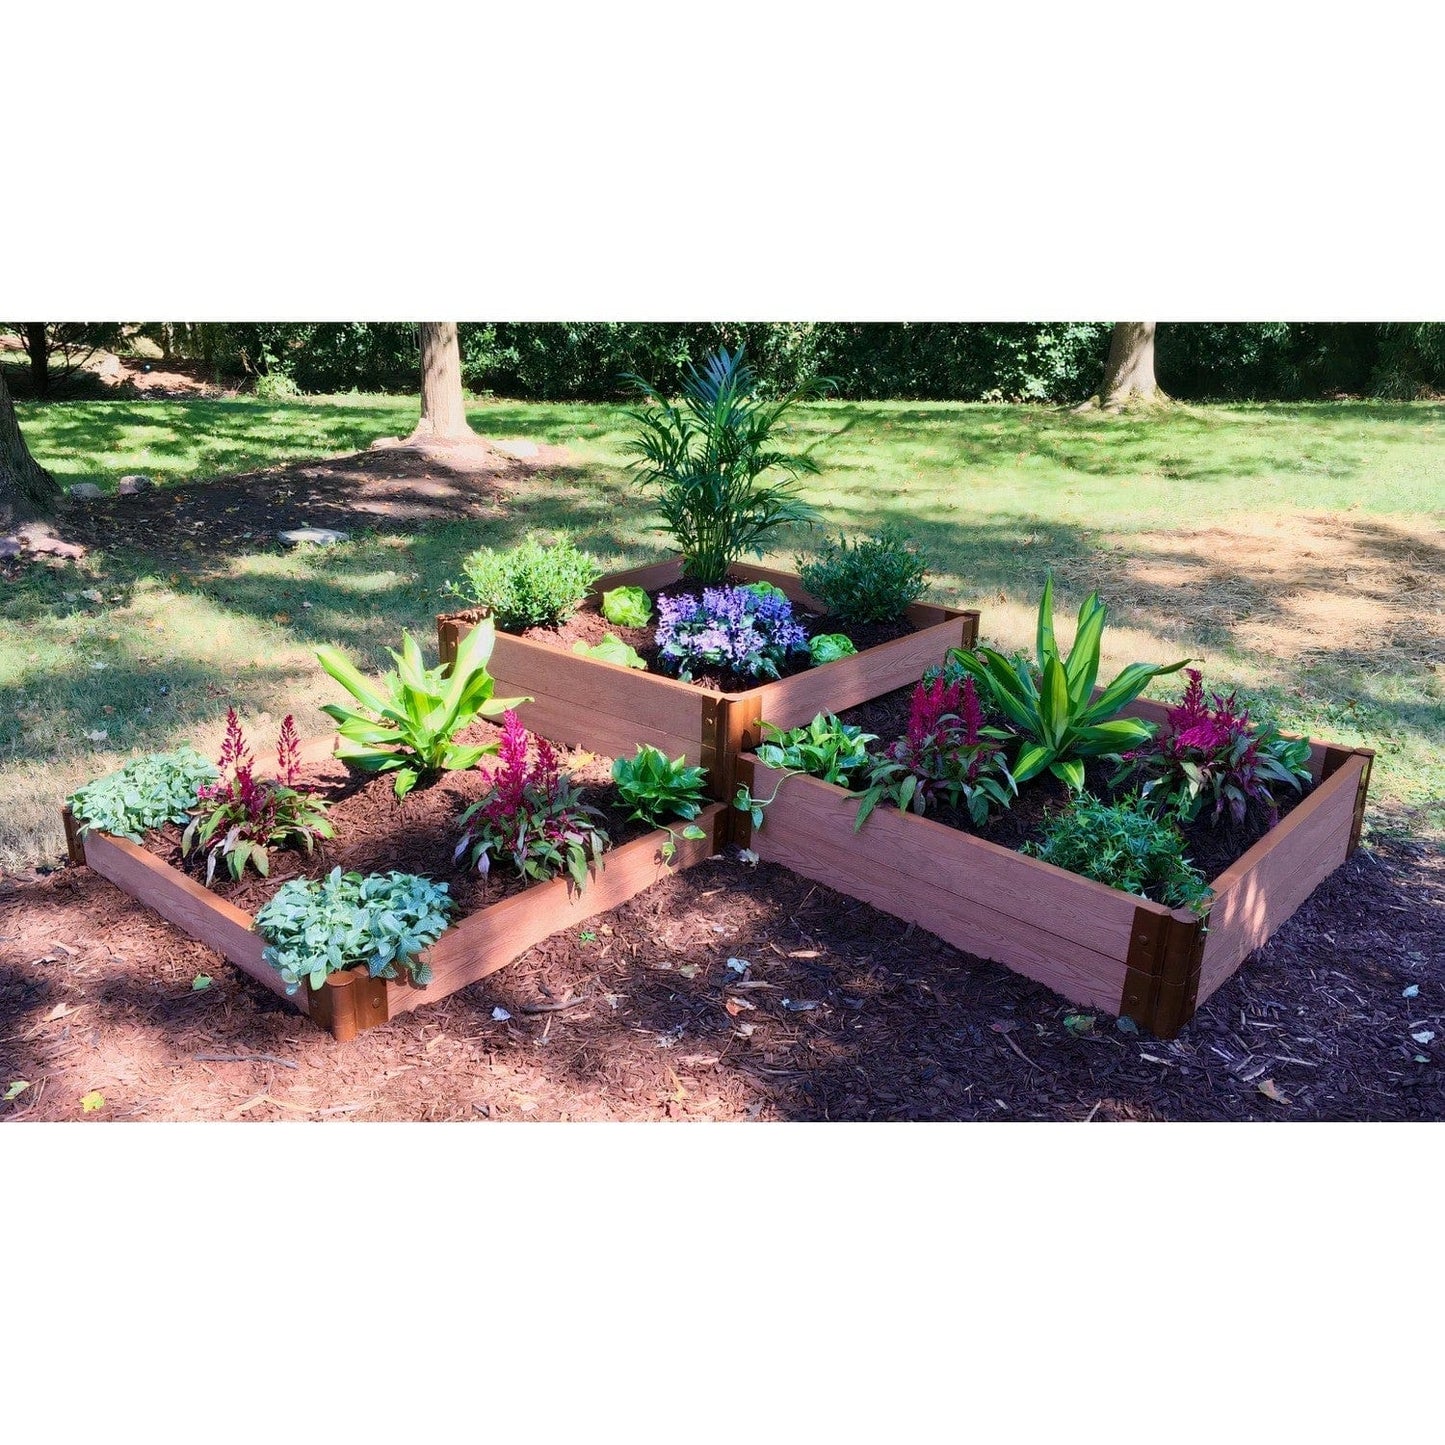 Frame It All Gardening Accessories Frame It All | Tool-Free Fort Knox Straight Corner Raised Garden Bed (Tri-Level) 8' X 8' X 16.5" - Weathered Wood - 1" Profile 800001022